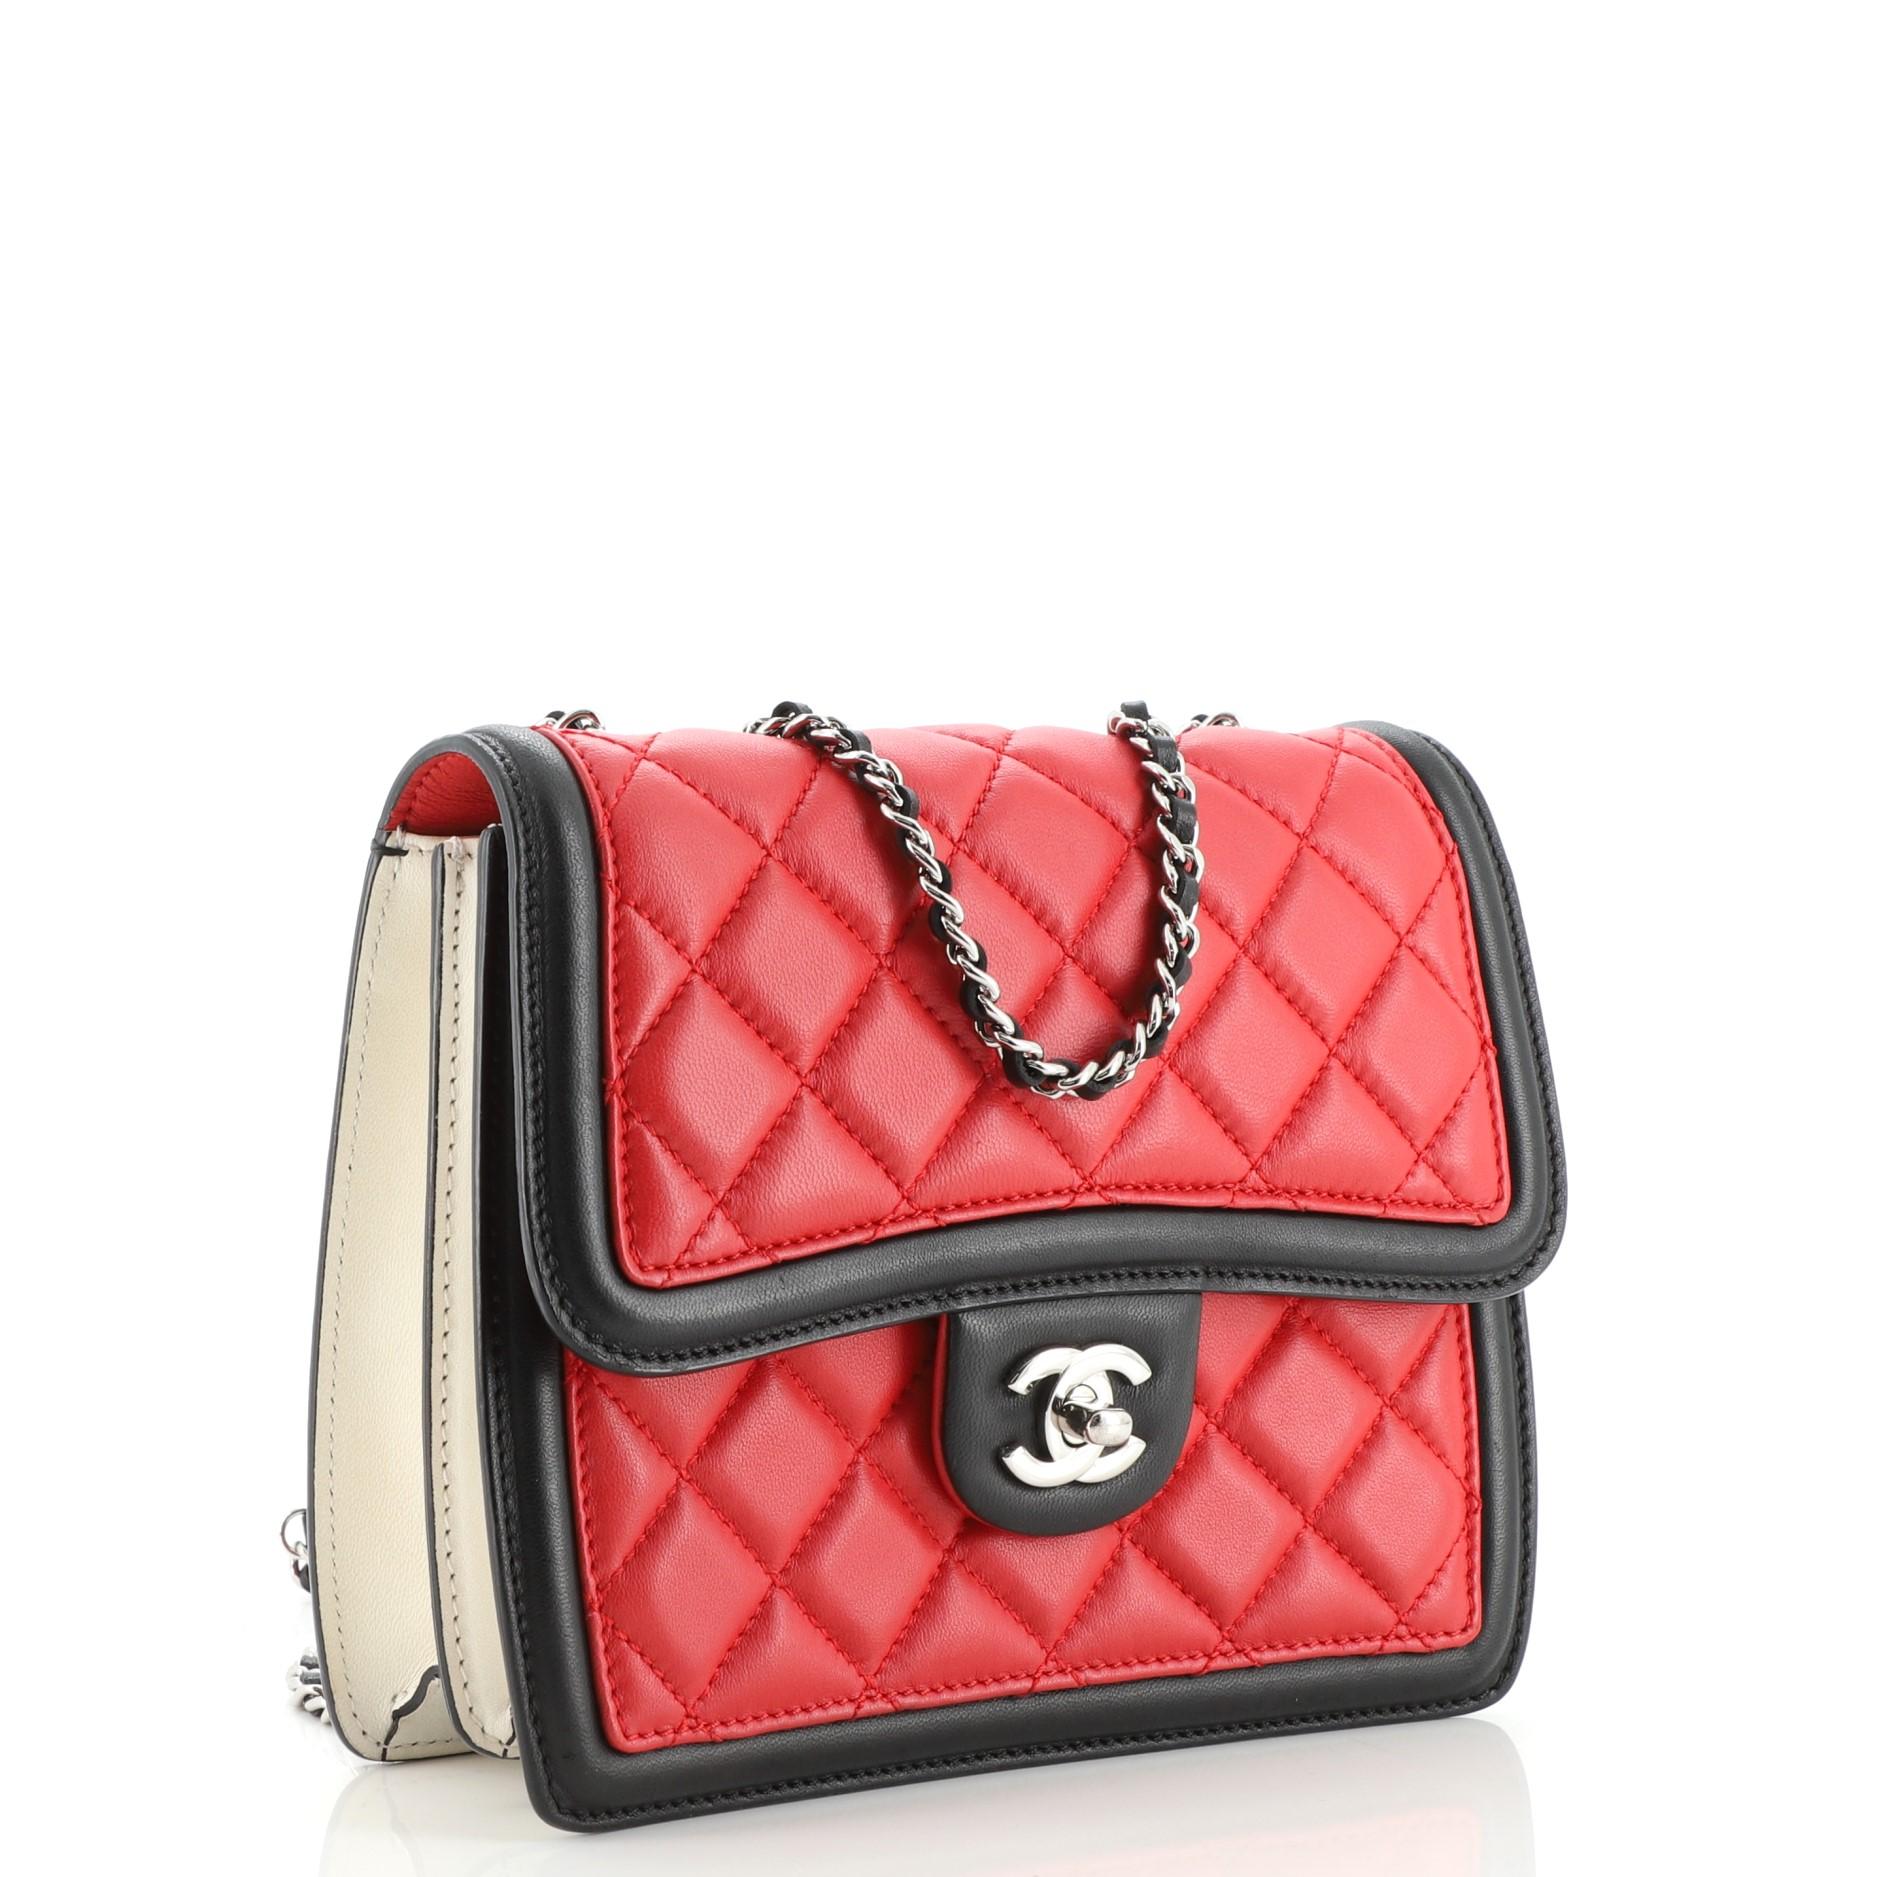 Red Chanel Graphic Flap Bag Quilted Calfskin Mini